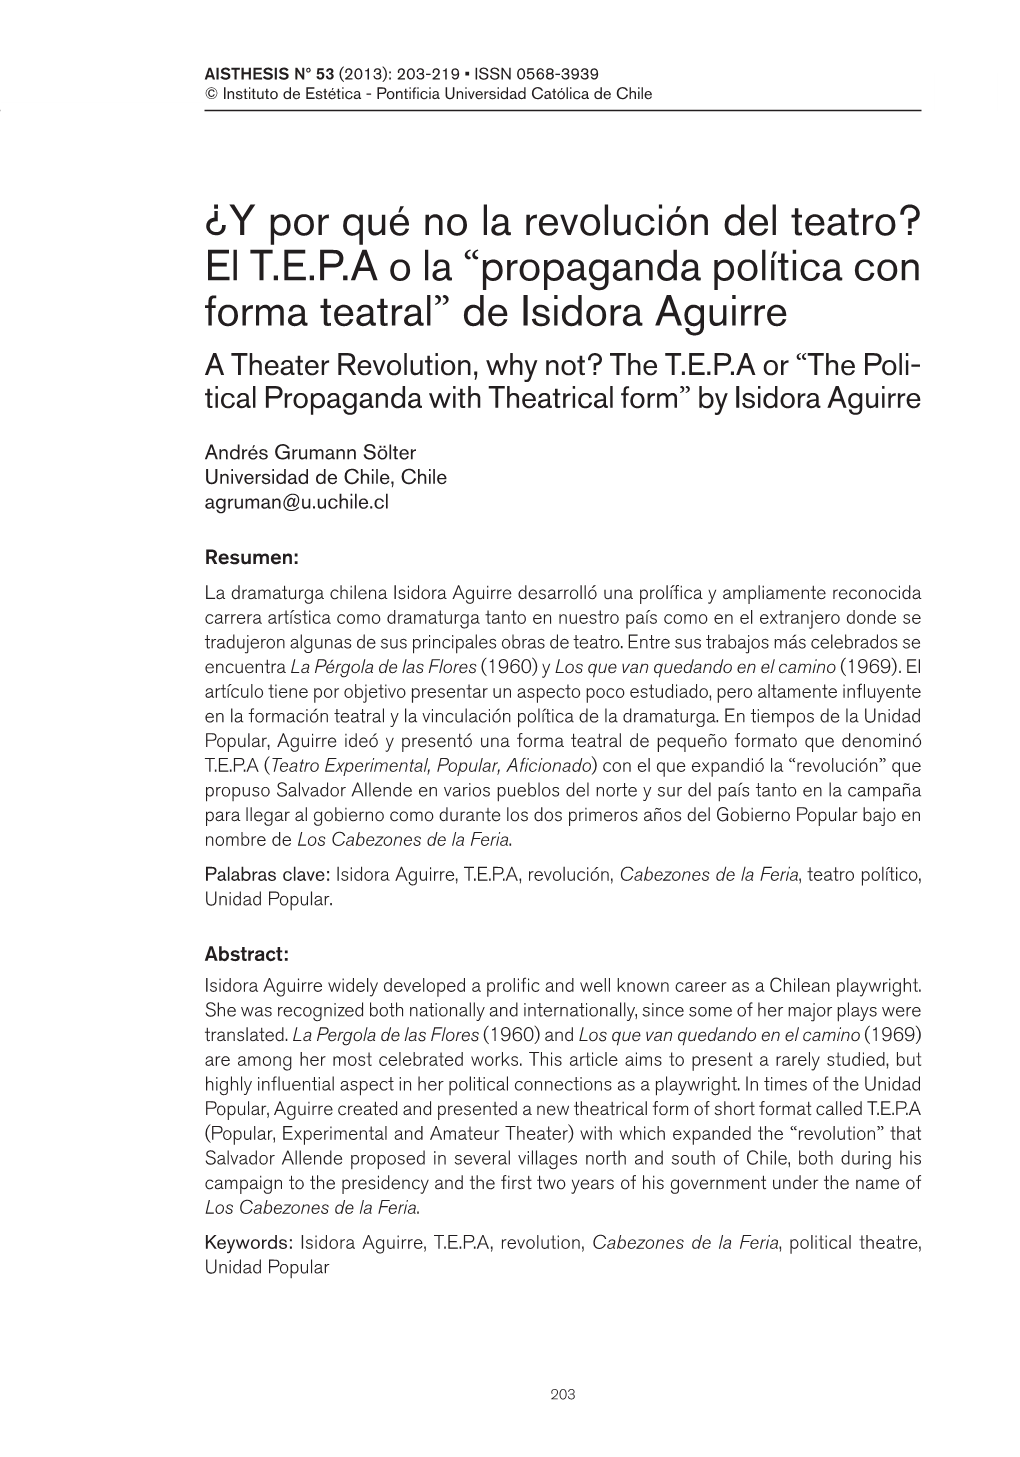 De Isidora Aguirre a Theater Revolution, Why Not? the T.E.P.A Or “The Poli- Tical Propaganda with Theatrical Form” by Isidora Aguirre